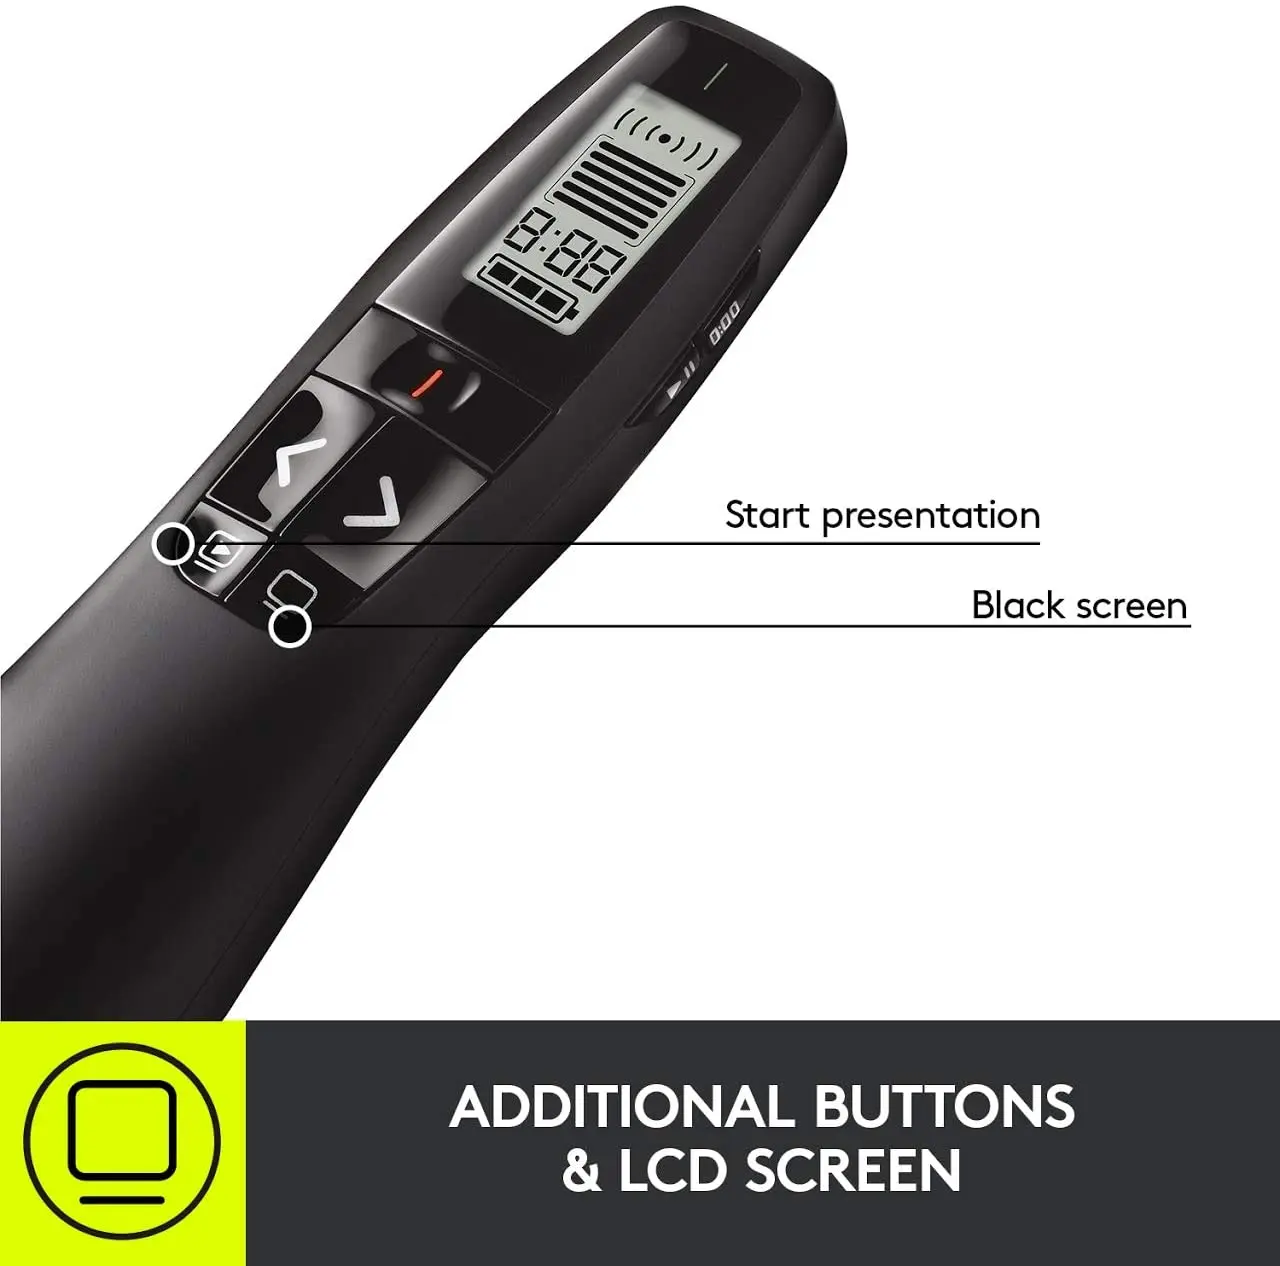 Logitech R800 Laser Presentation Remote With Lcd Display For Time Tracking